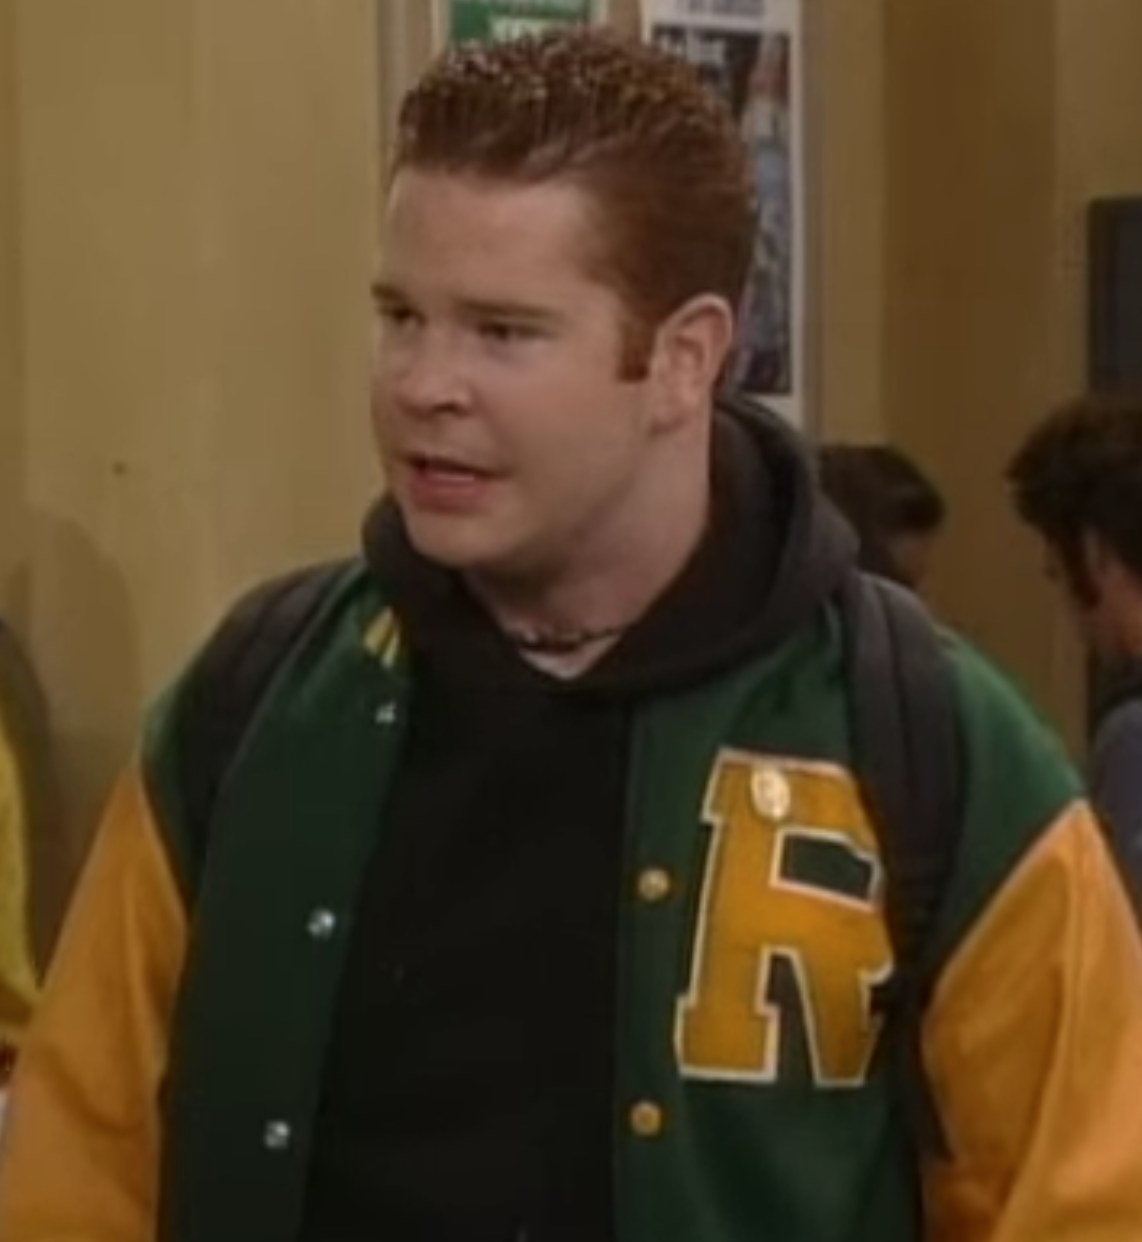 Steve wears his letterman jacket and asks Tia for academic information before she leaves for private school